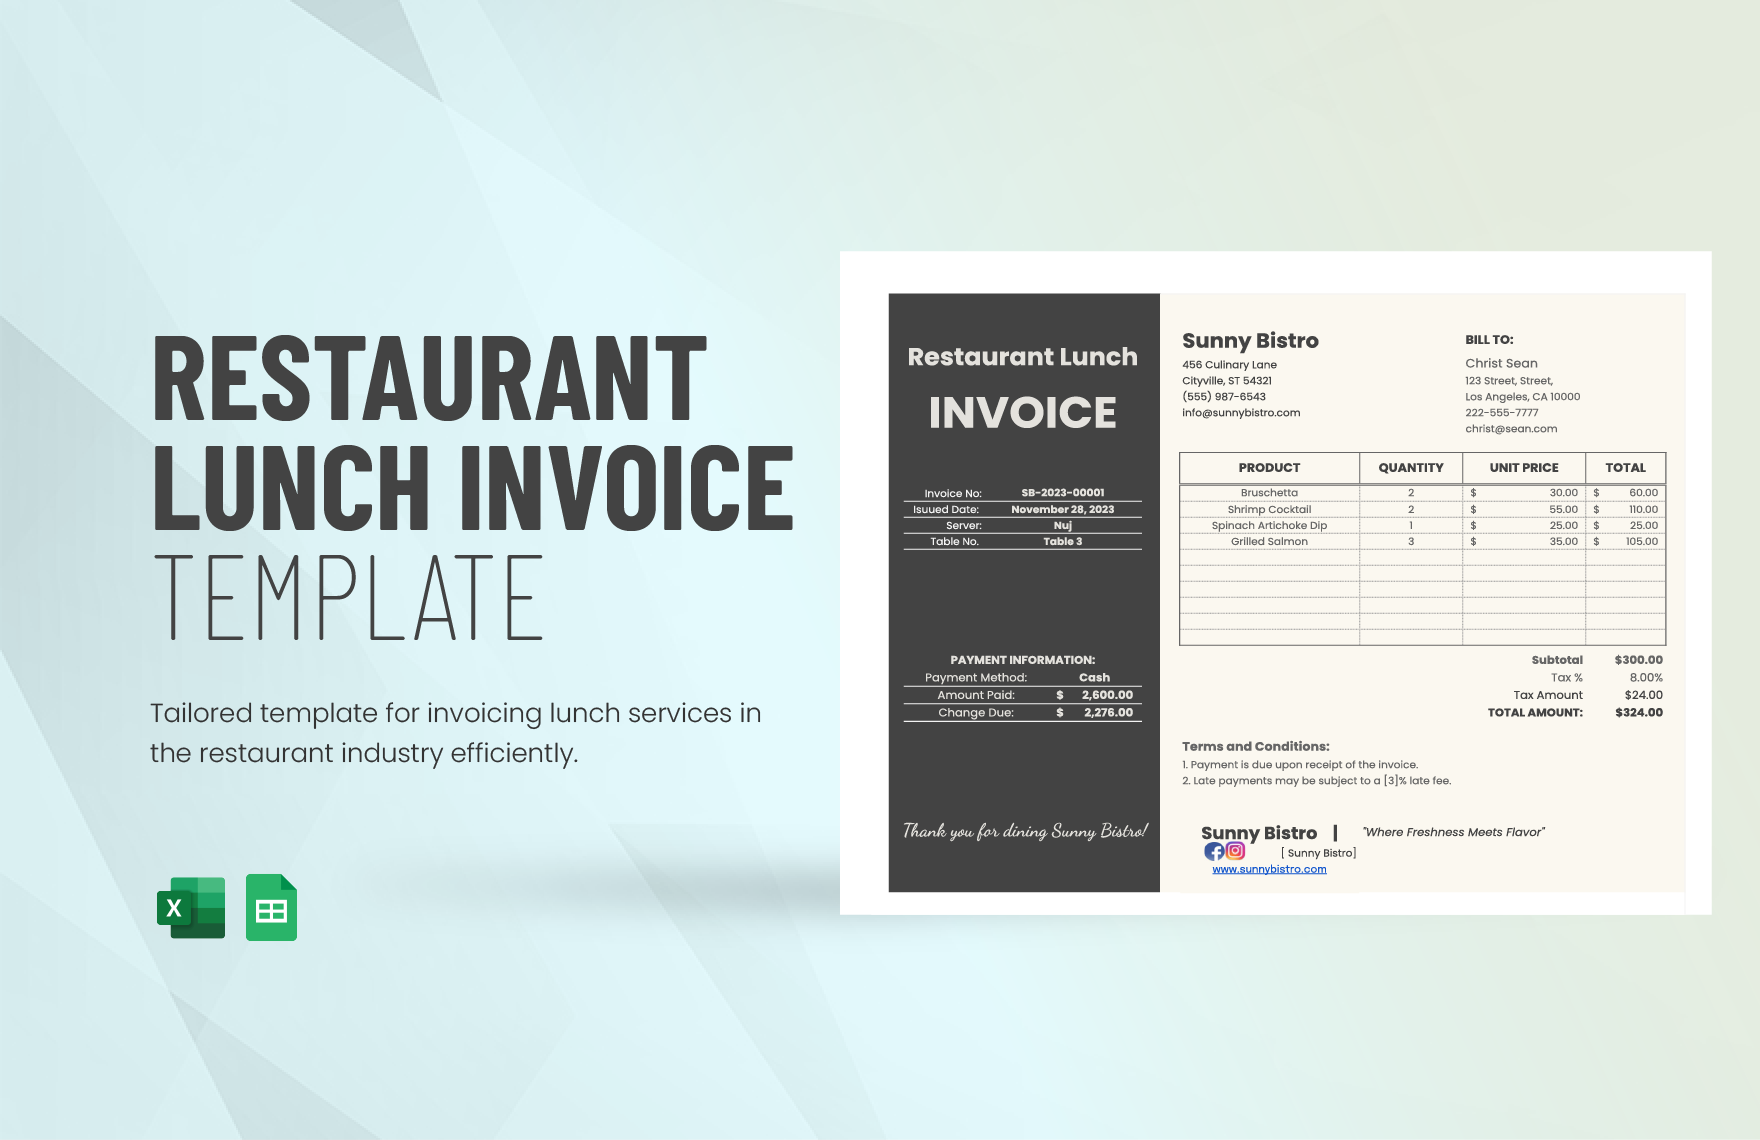 Restaurant Lunch Invoice Template